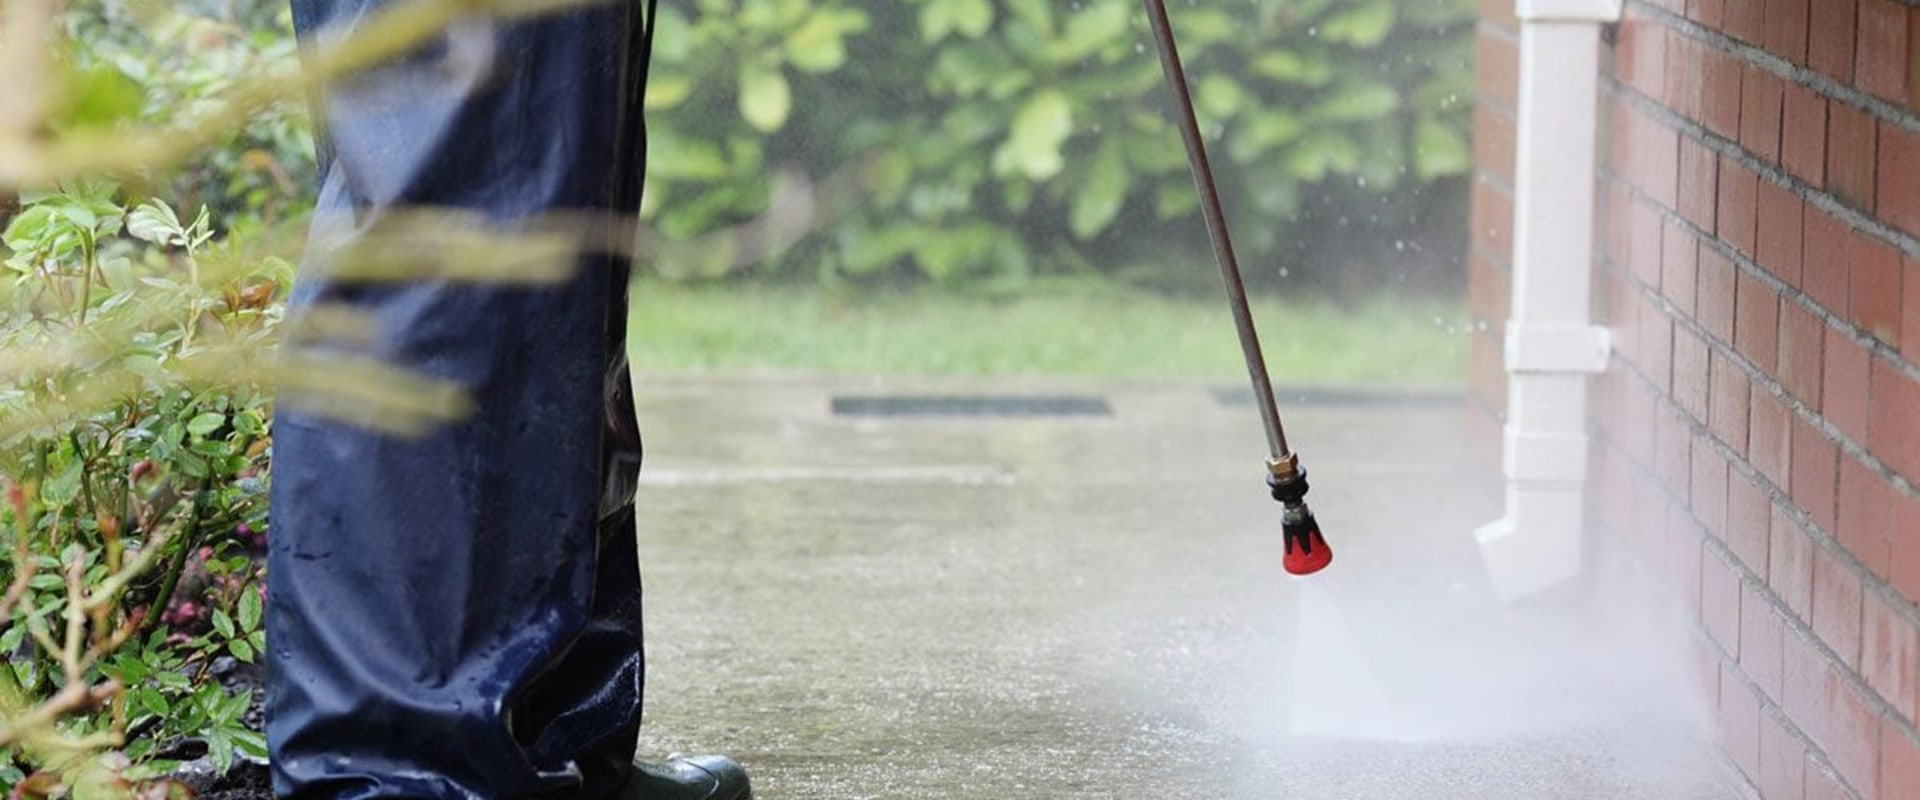 What surfaces should not be pressure washed?